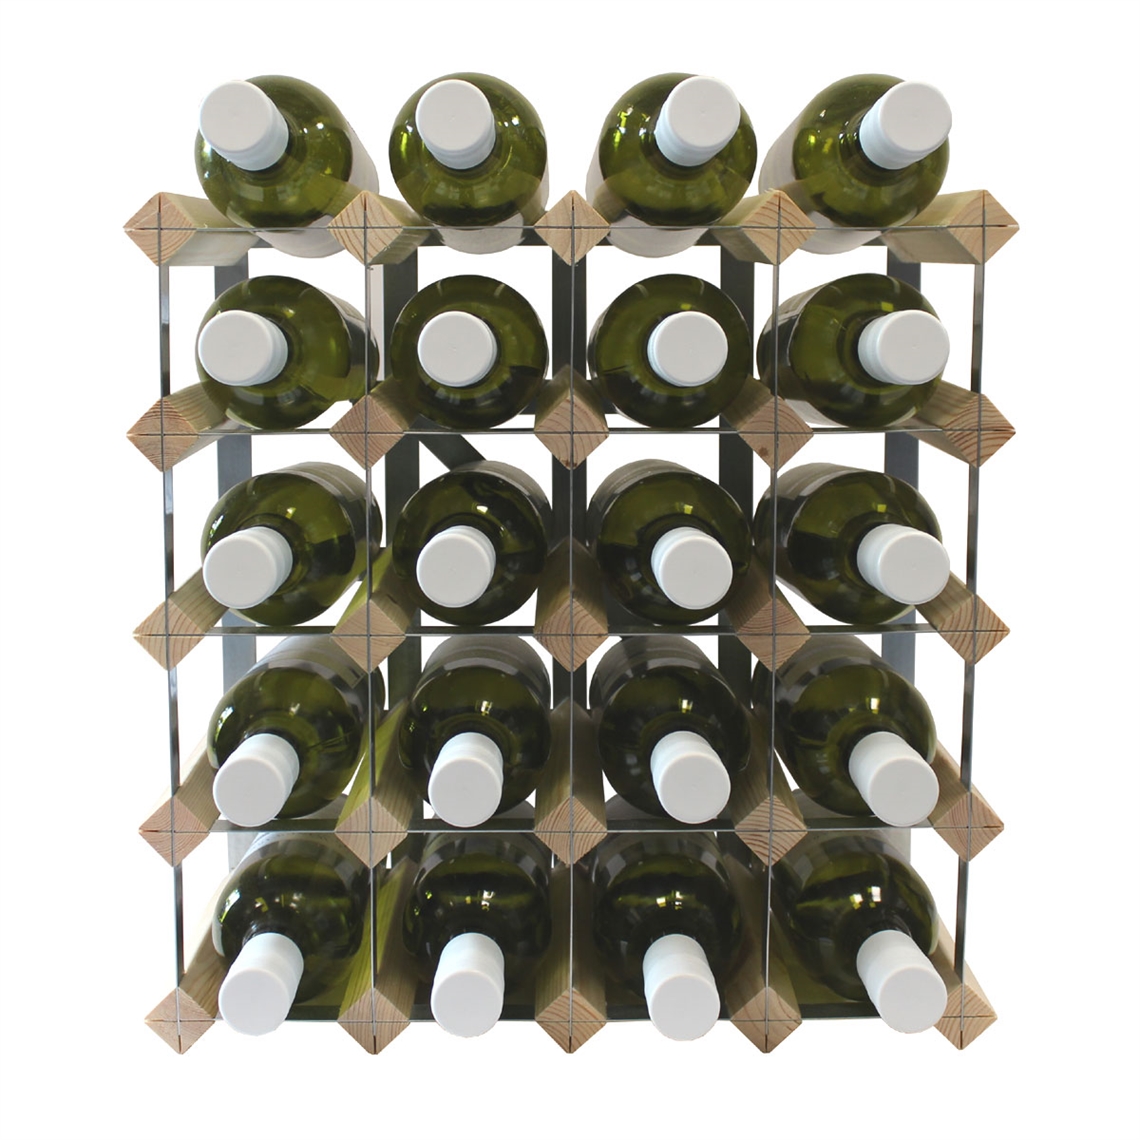 View more isoco from our Assembled Wine Racks range